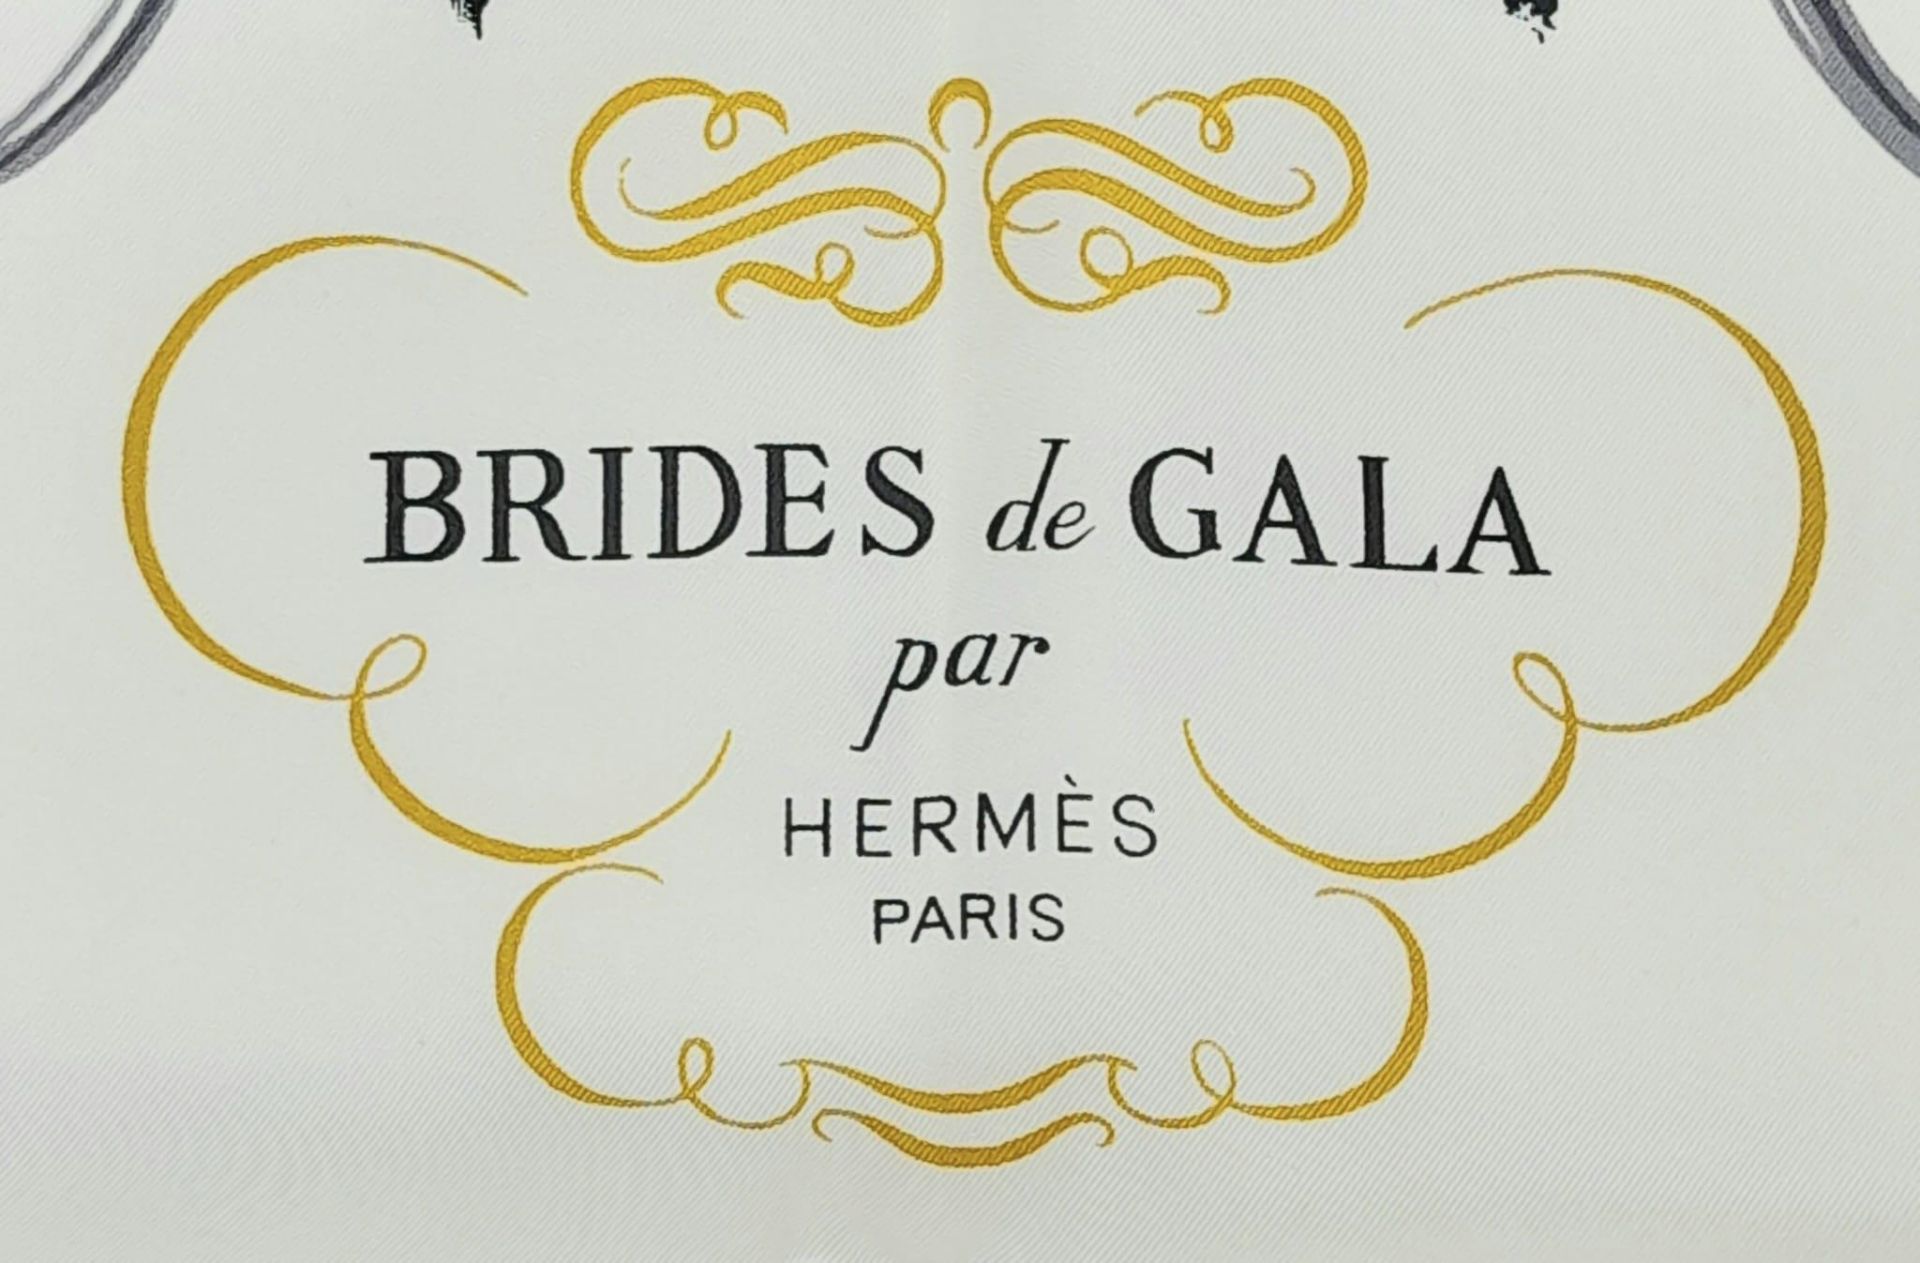 A Hermes Carre Silk Scarf "Brides de Gala" in Black, White and Gold Equestrian Print, features a - Image 2 of 5